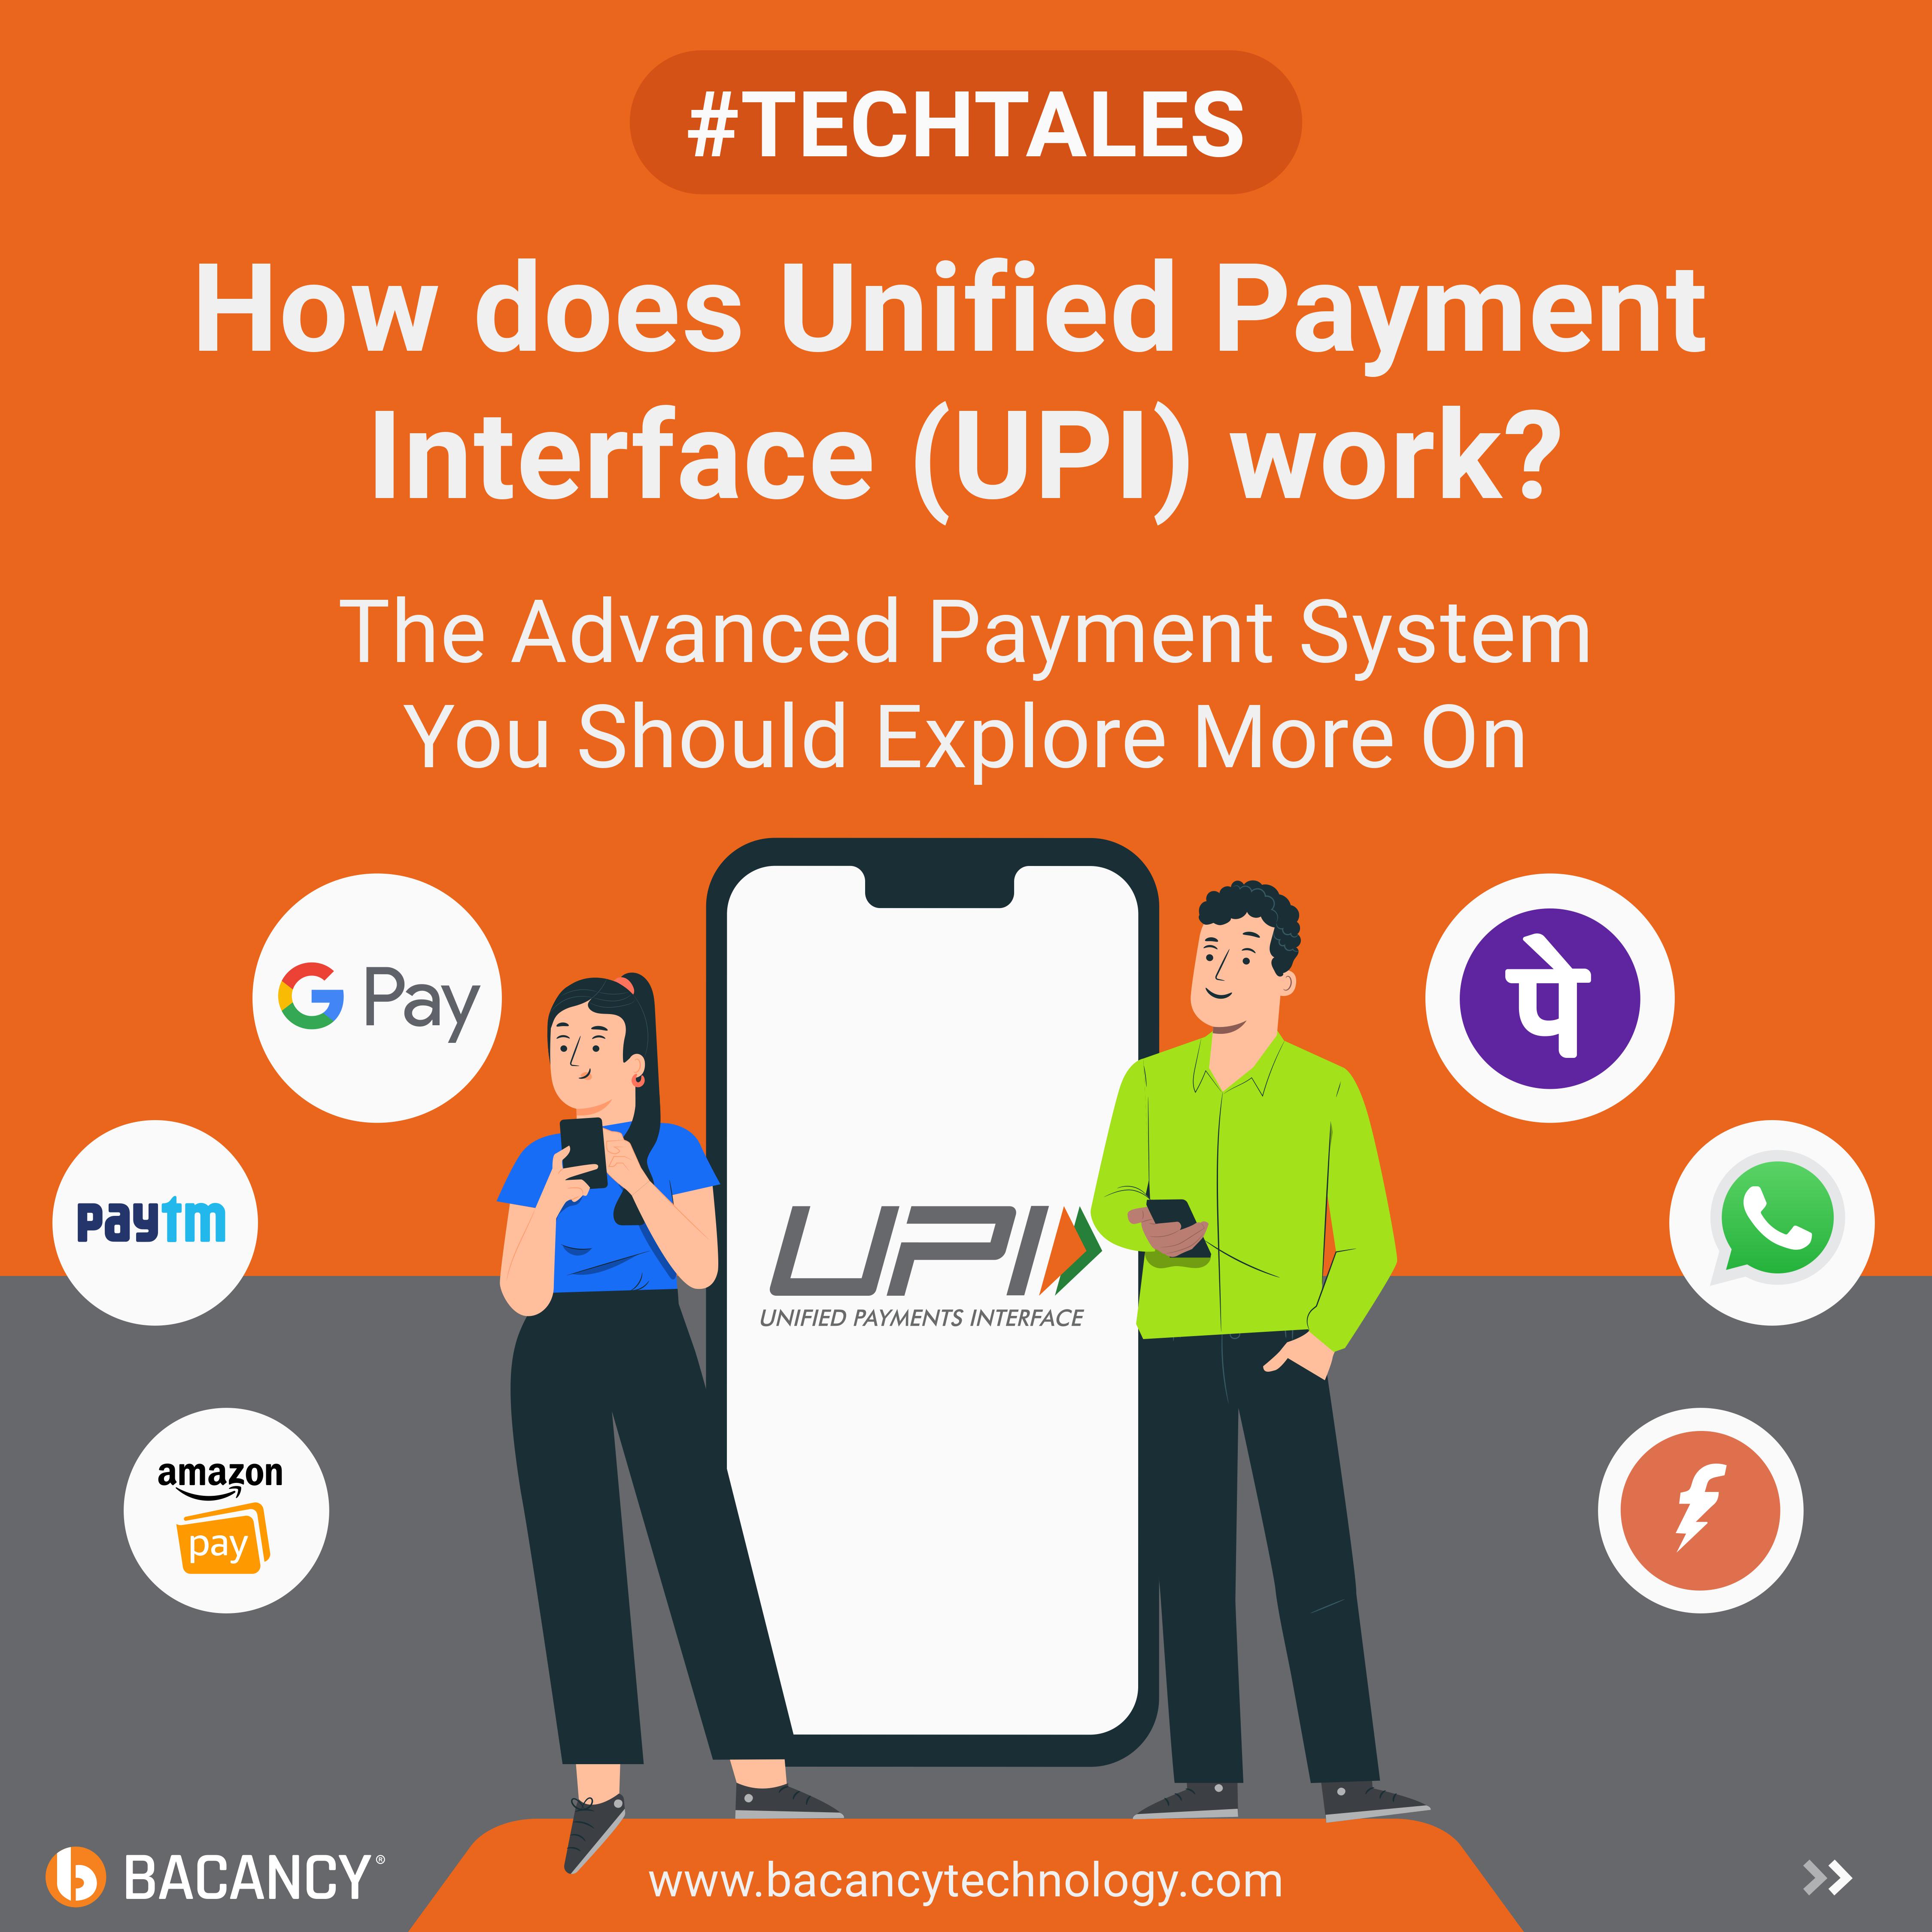 How does Unified Payment Interface (UPI) work?